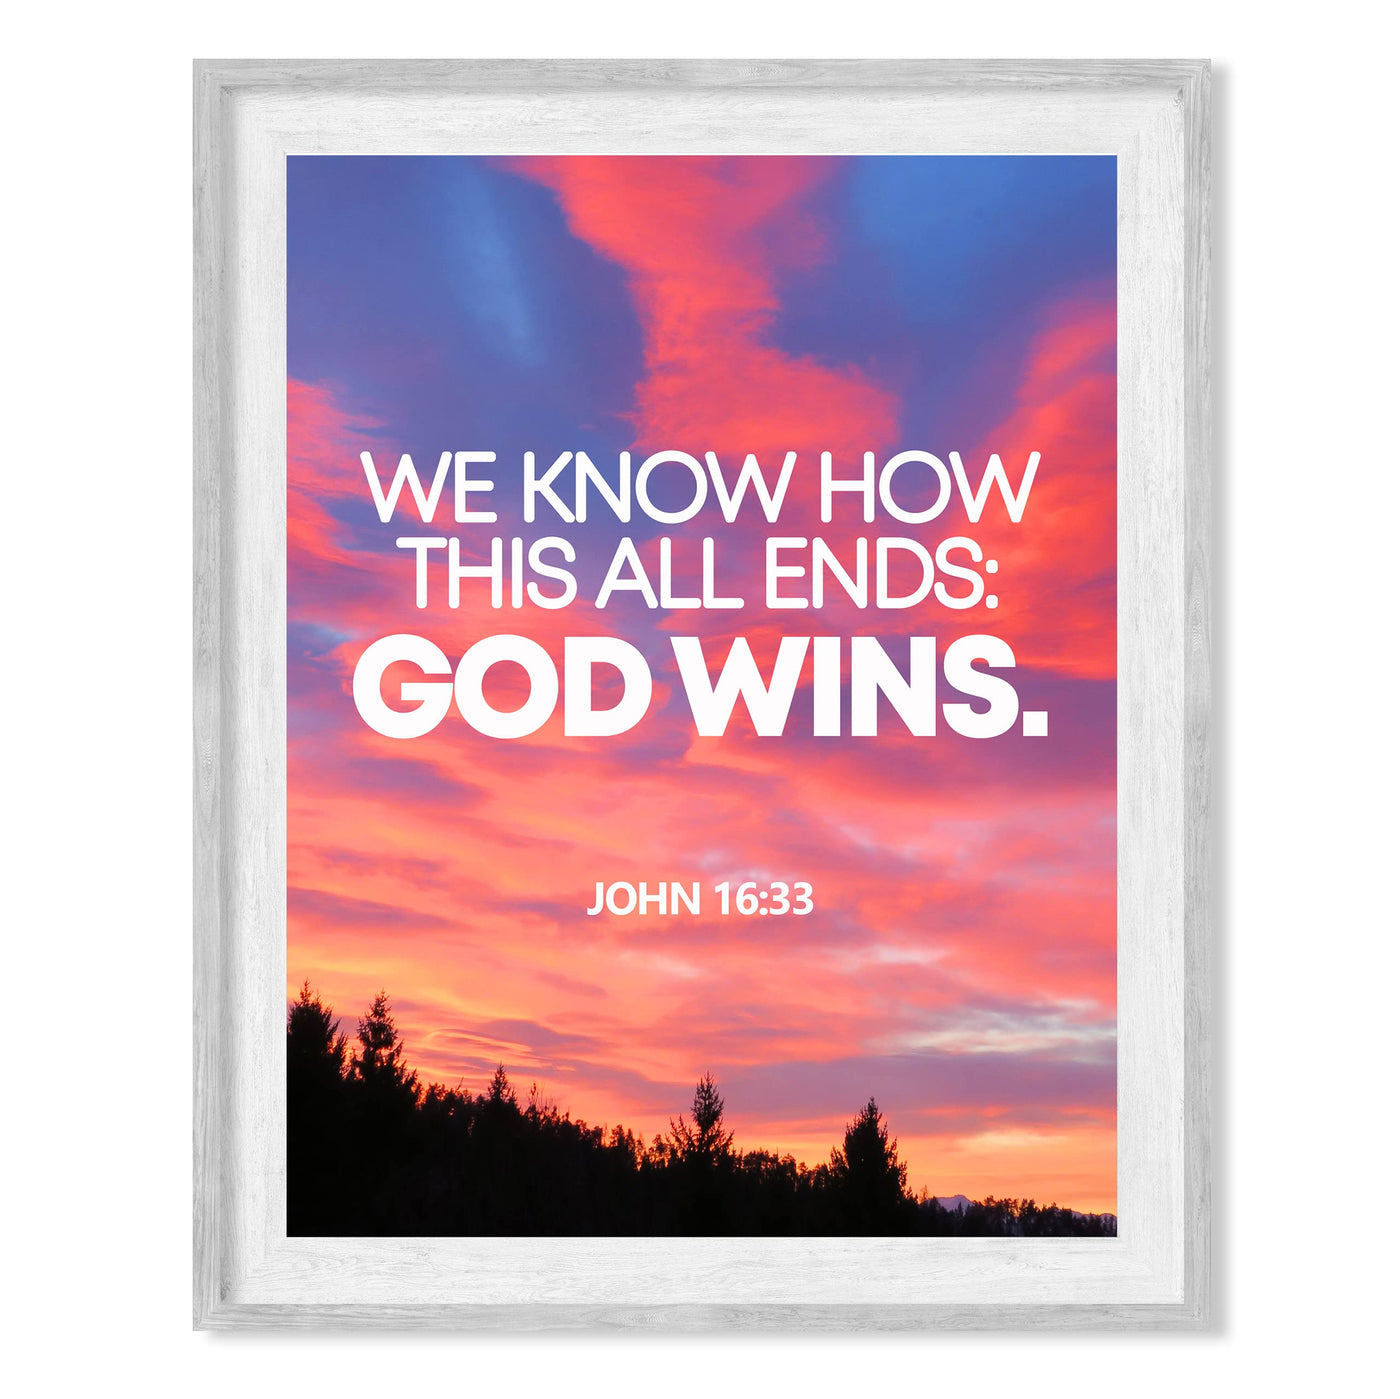 We Know How This All Ends-God Wins-John 16:33 Bible Verse Wall Art -8 x 10" Scripture Sunset Photo Print -Ready to Frame. Religious Home-Office-Church-Sunday School Decor. Perfect Christian Gift!